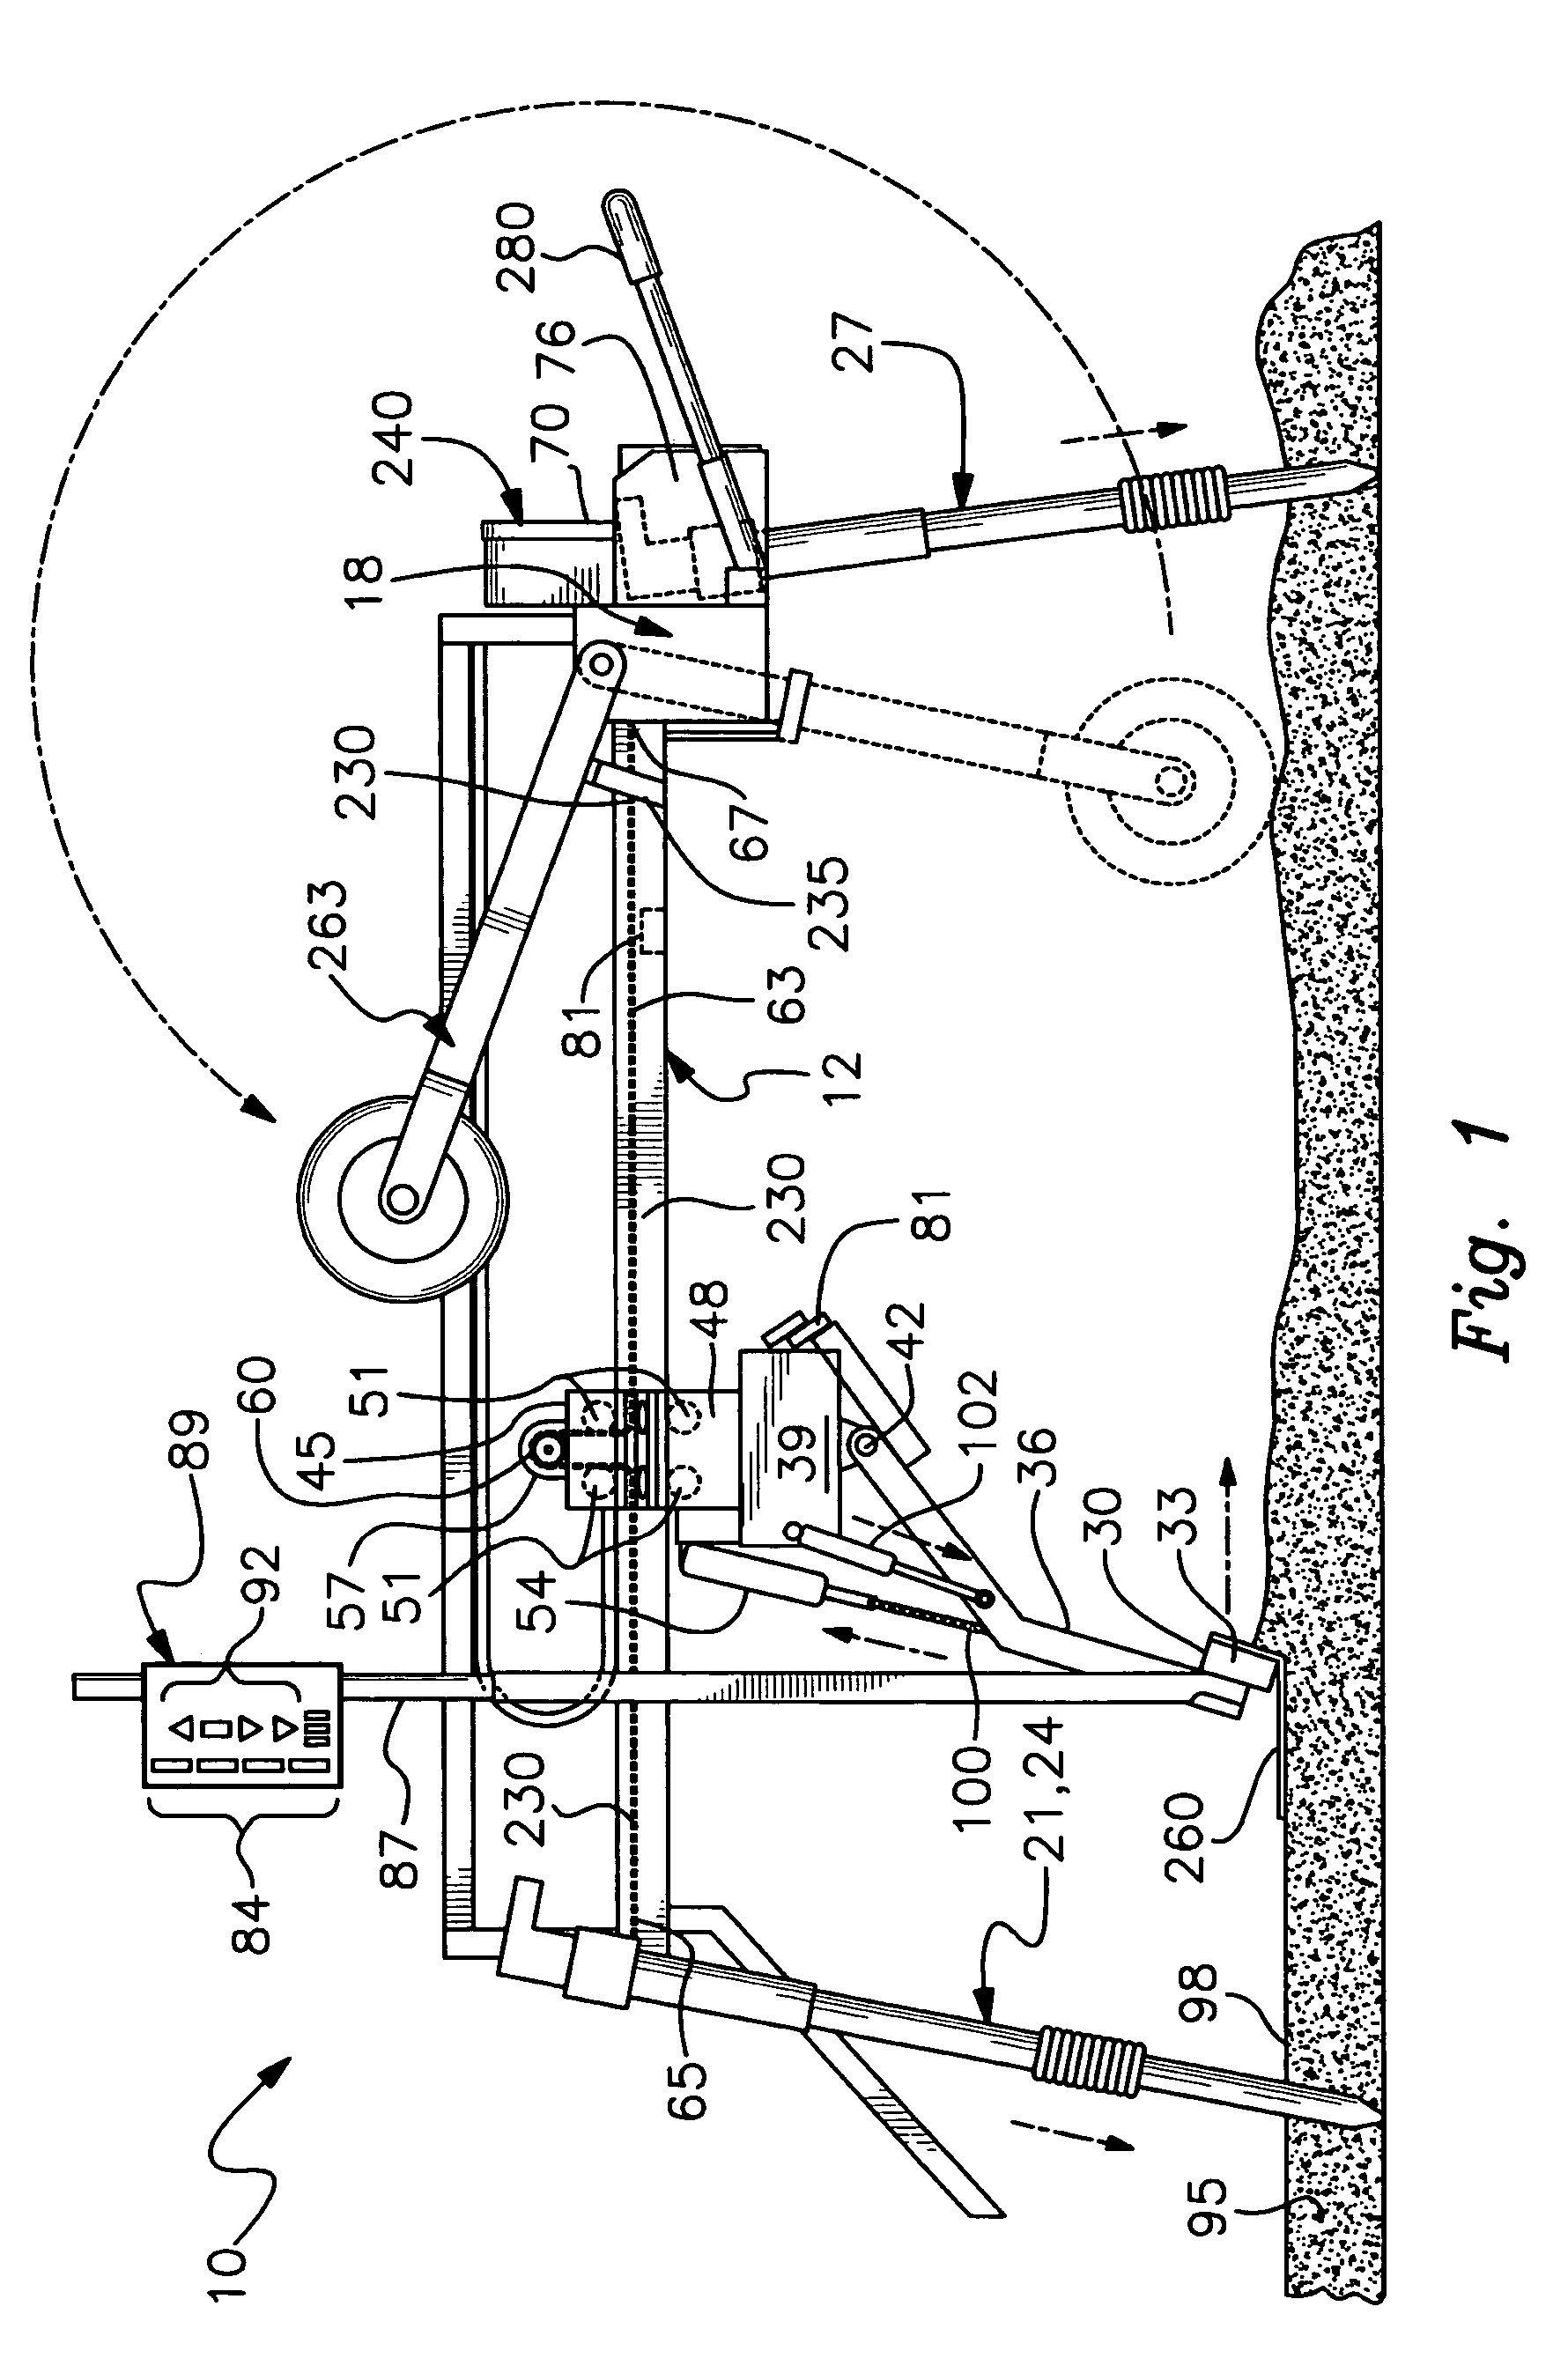 Lightweight self-leveling automatic screed apparatus